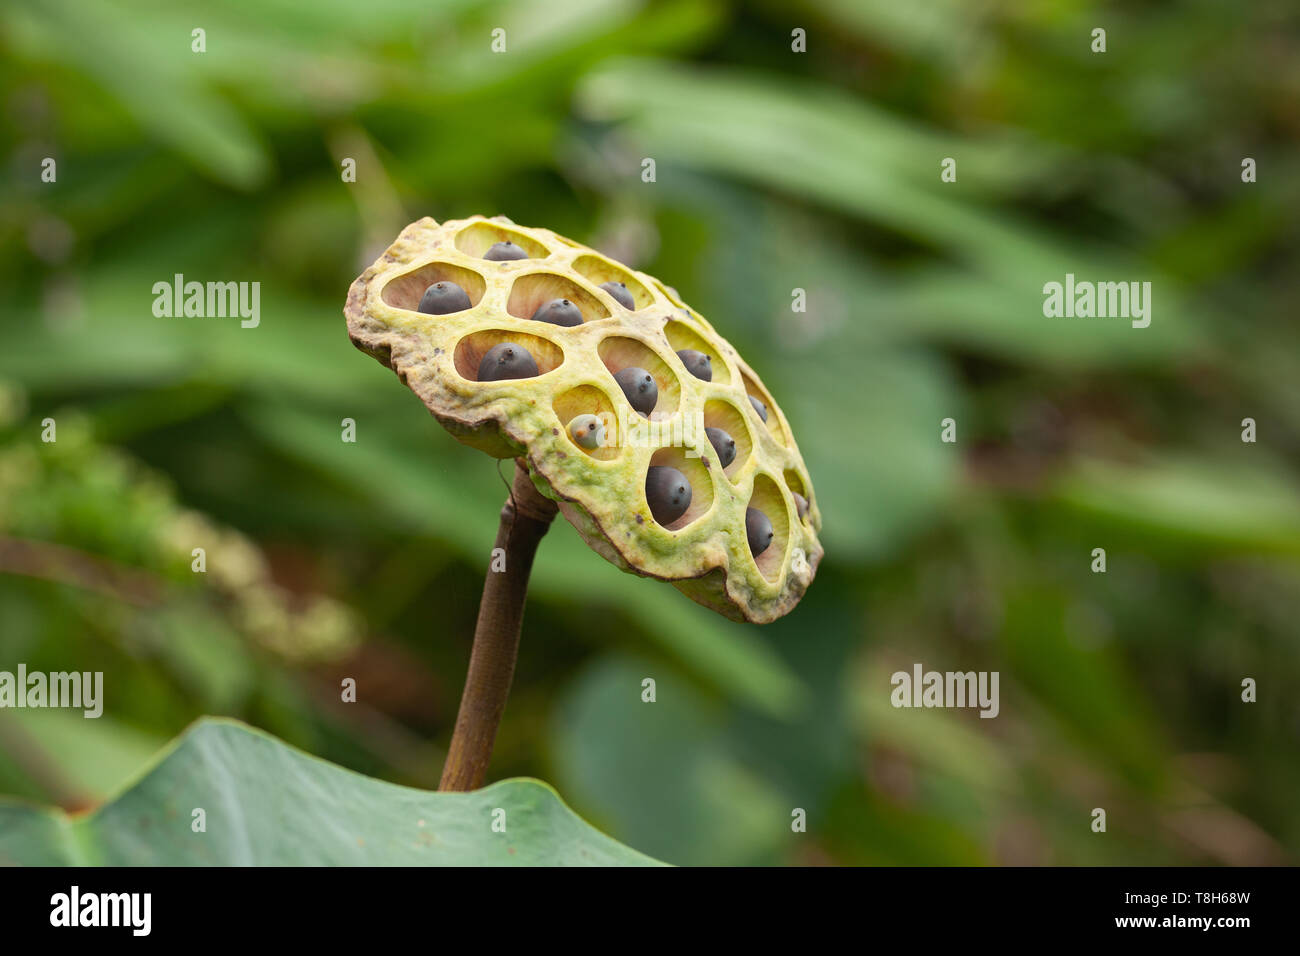 Waterlily or lotus seeds, close-up photo with selective focus Stock Photo